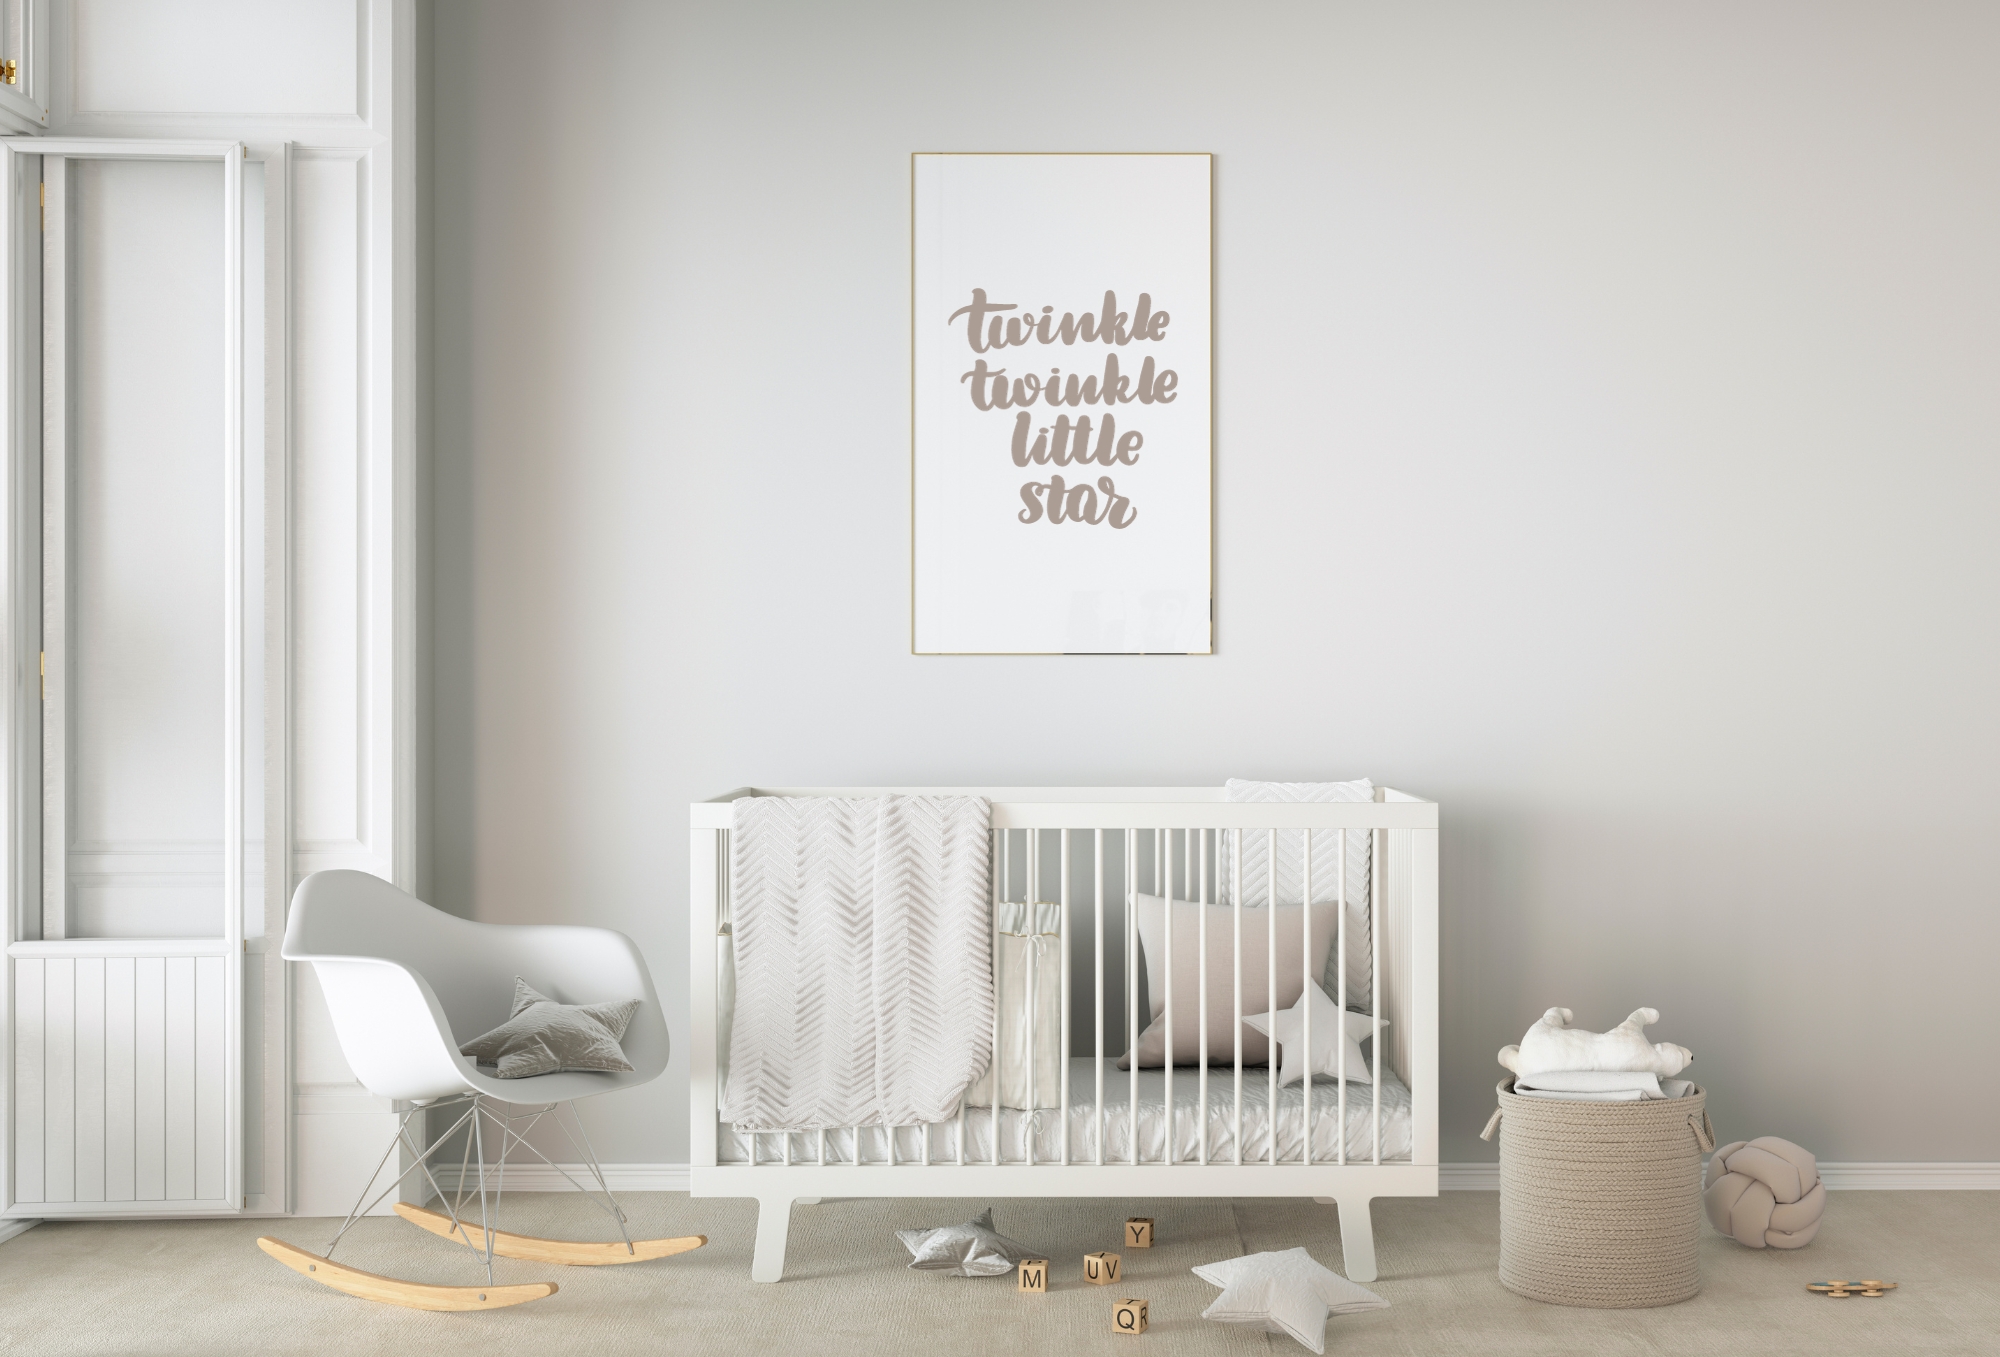 Image of nursery with crib, chair, and wall frame that reads "Twinkle twinkle little star."